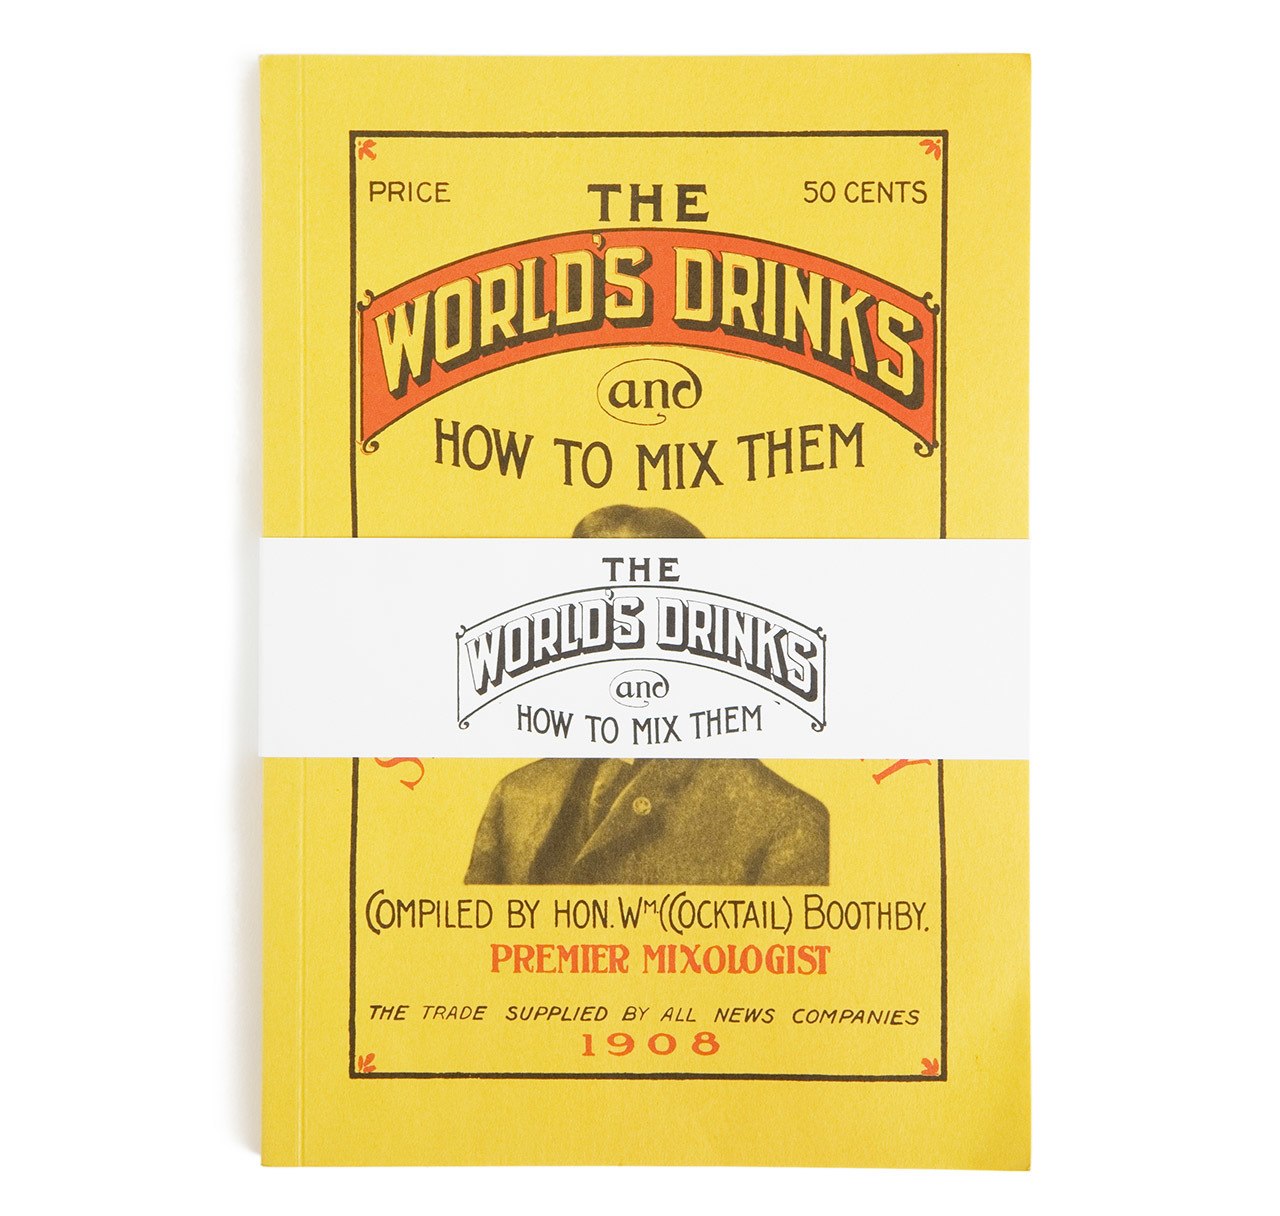 World's Drinks and How to Mix Them by William Boothby